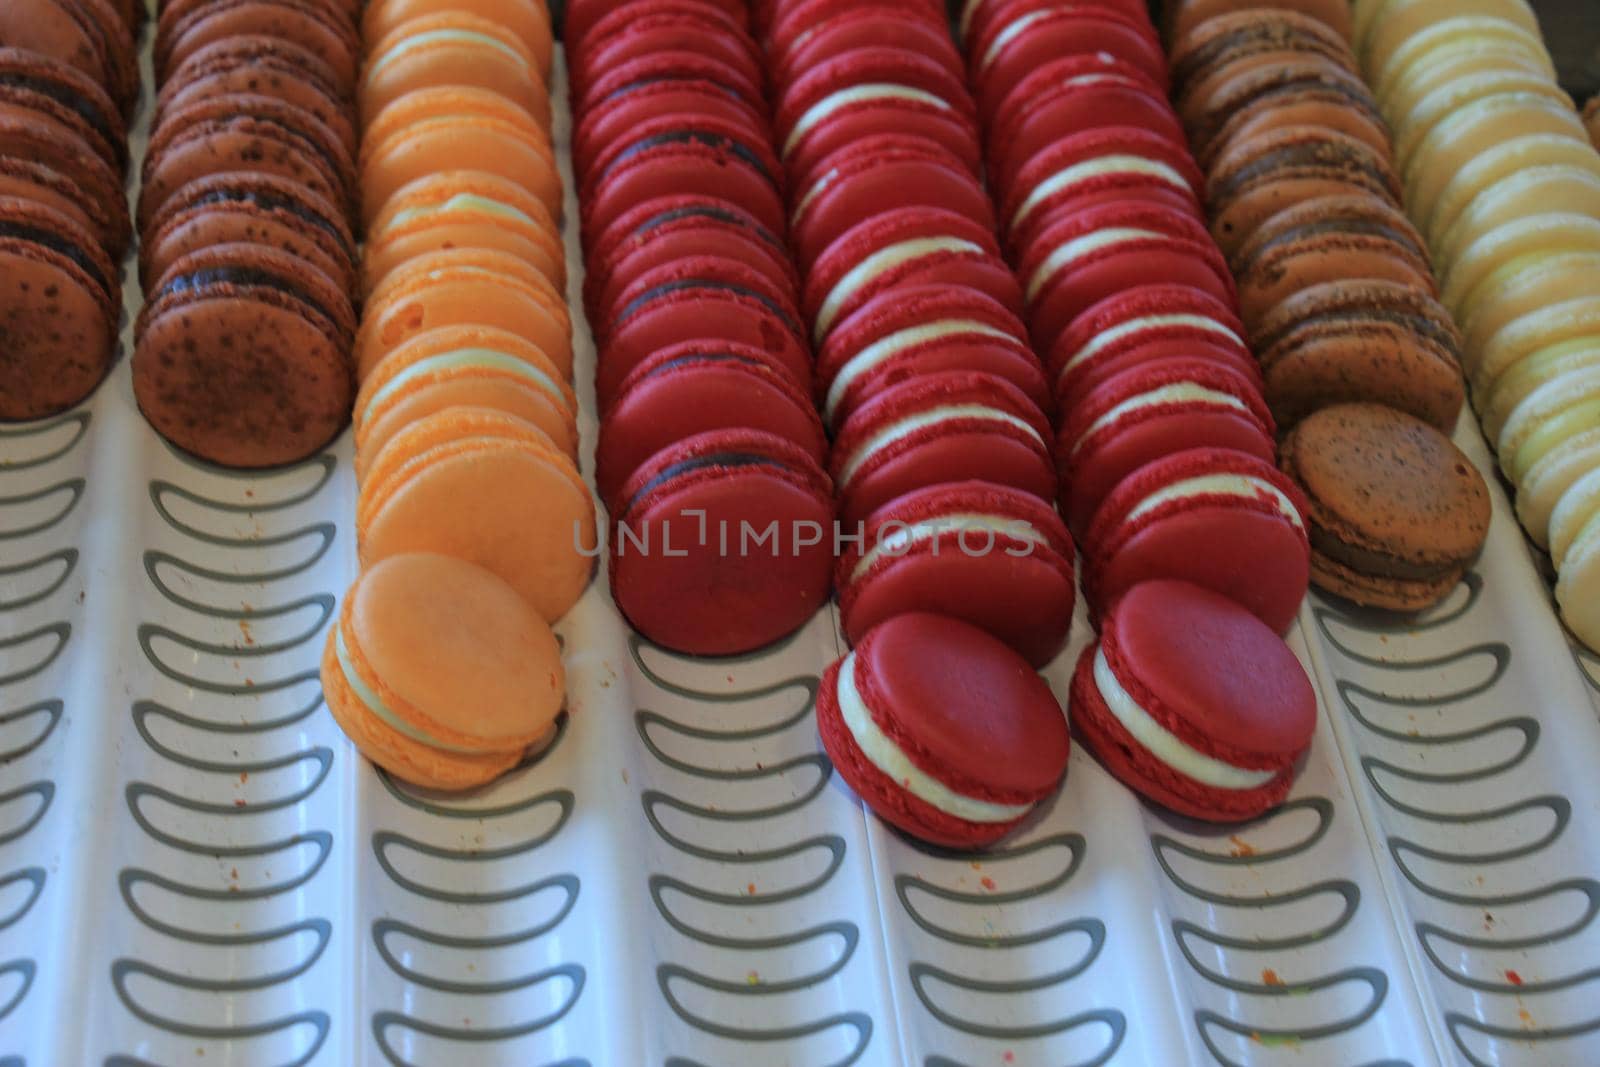 Macarons in various flavors and colors on display in a store